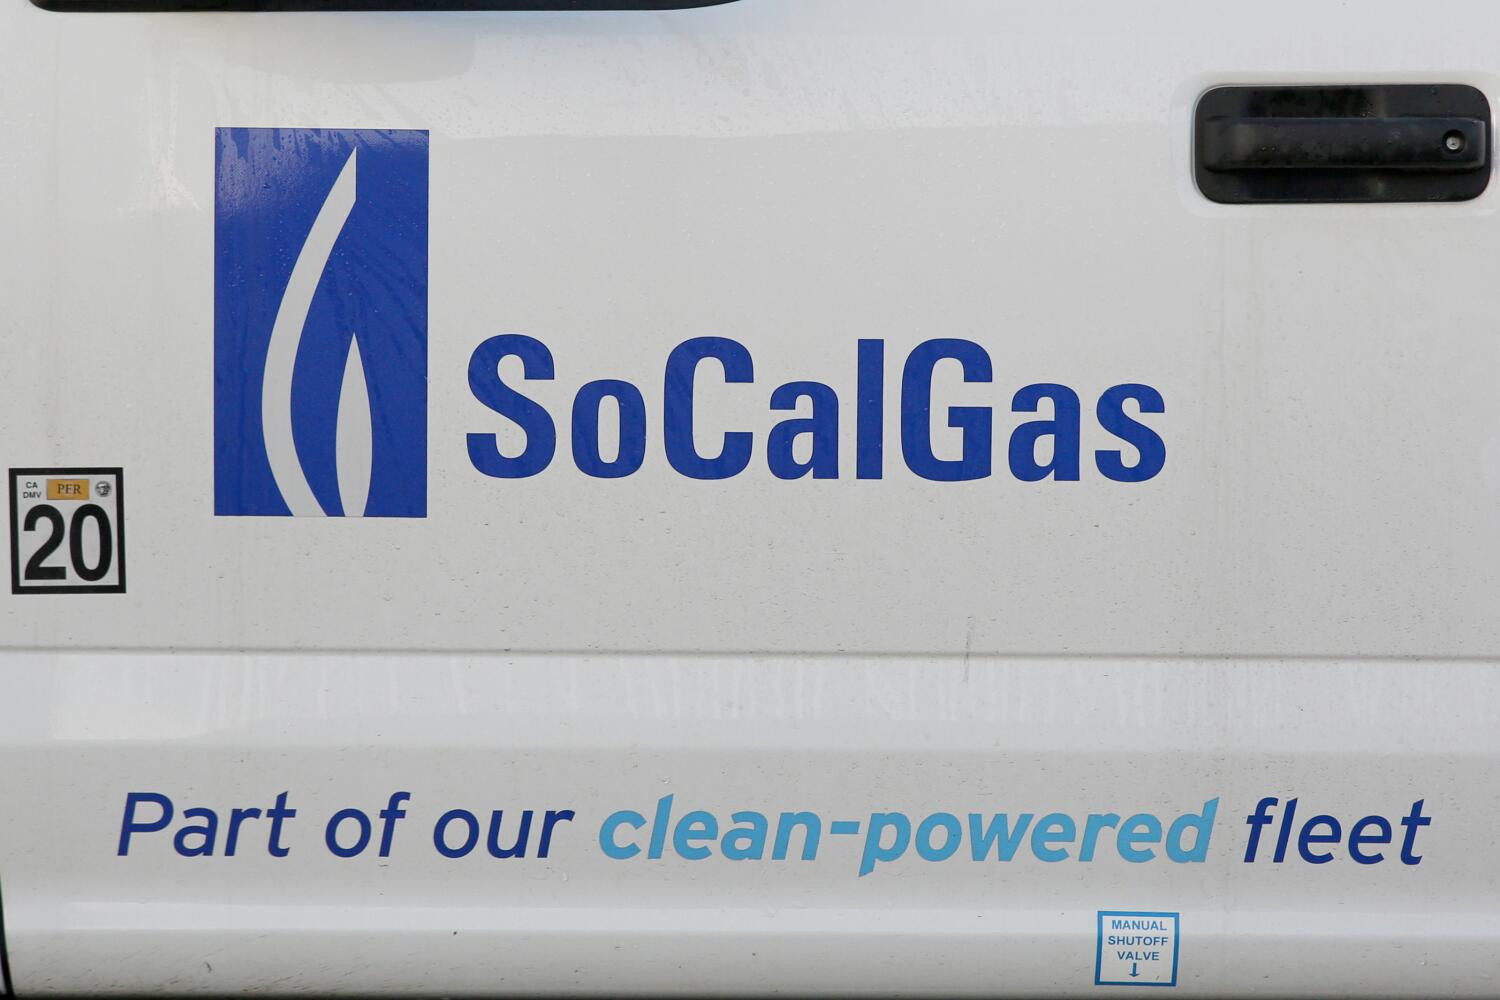 Want to know if your gas bill will increase this winter? SoCalGas can warn you with a text